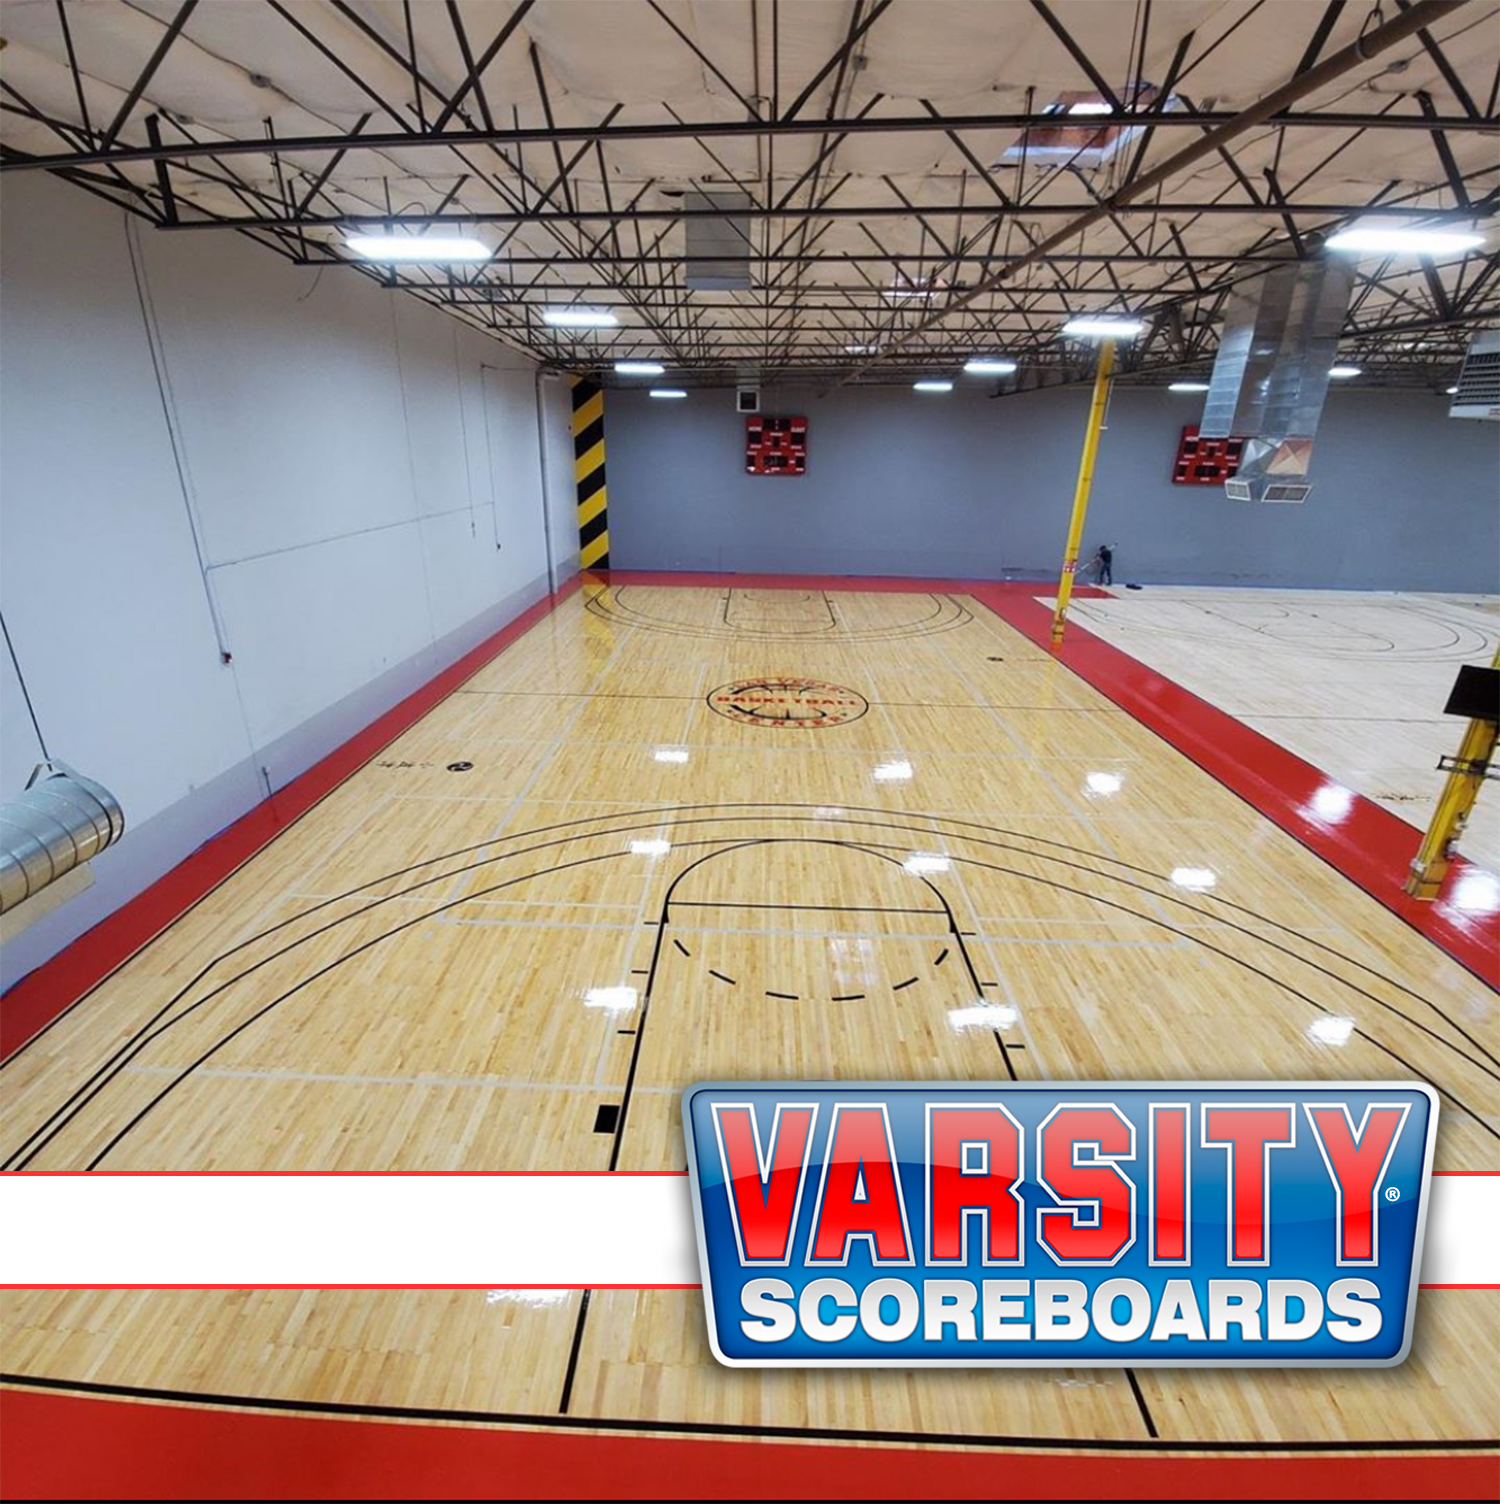 Varsity Scoreboards on X: We loved getting to be a part of the